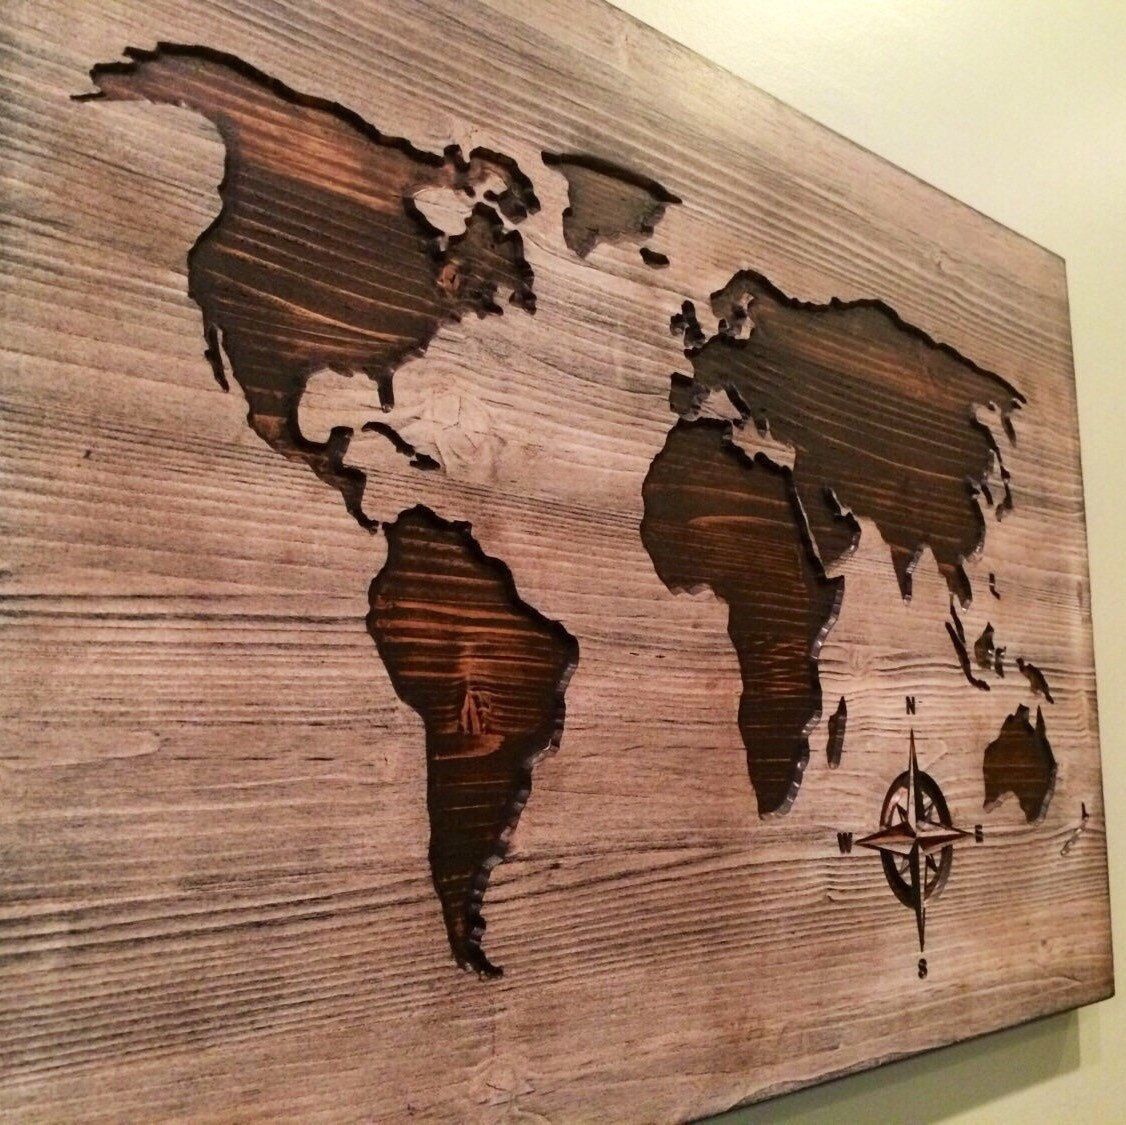 Carved, Wooden World Map, Wood Wall Art, World Map Home Decor, World Intended For Wooden World Map Wall Art (View 3 of 20)